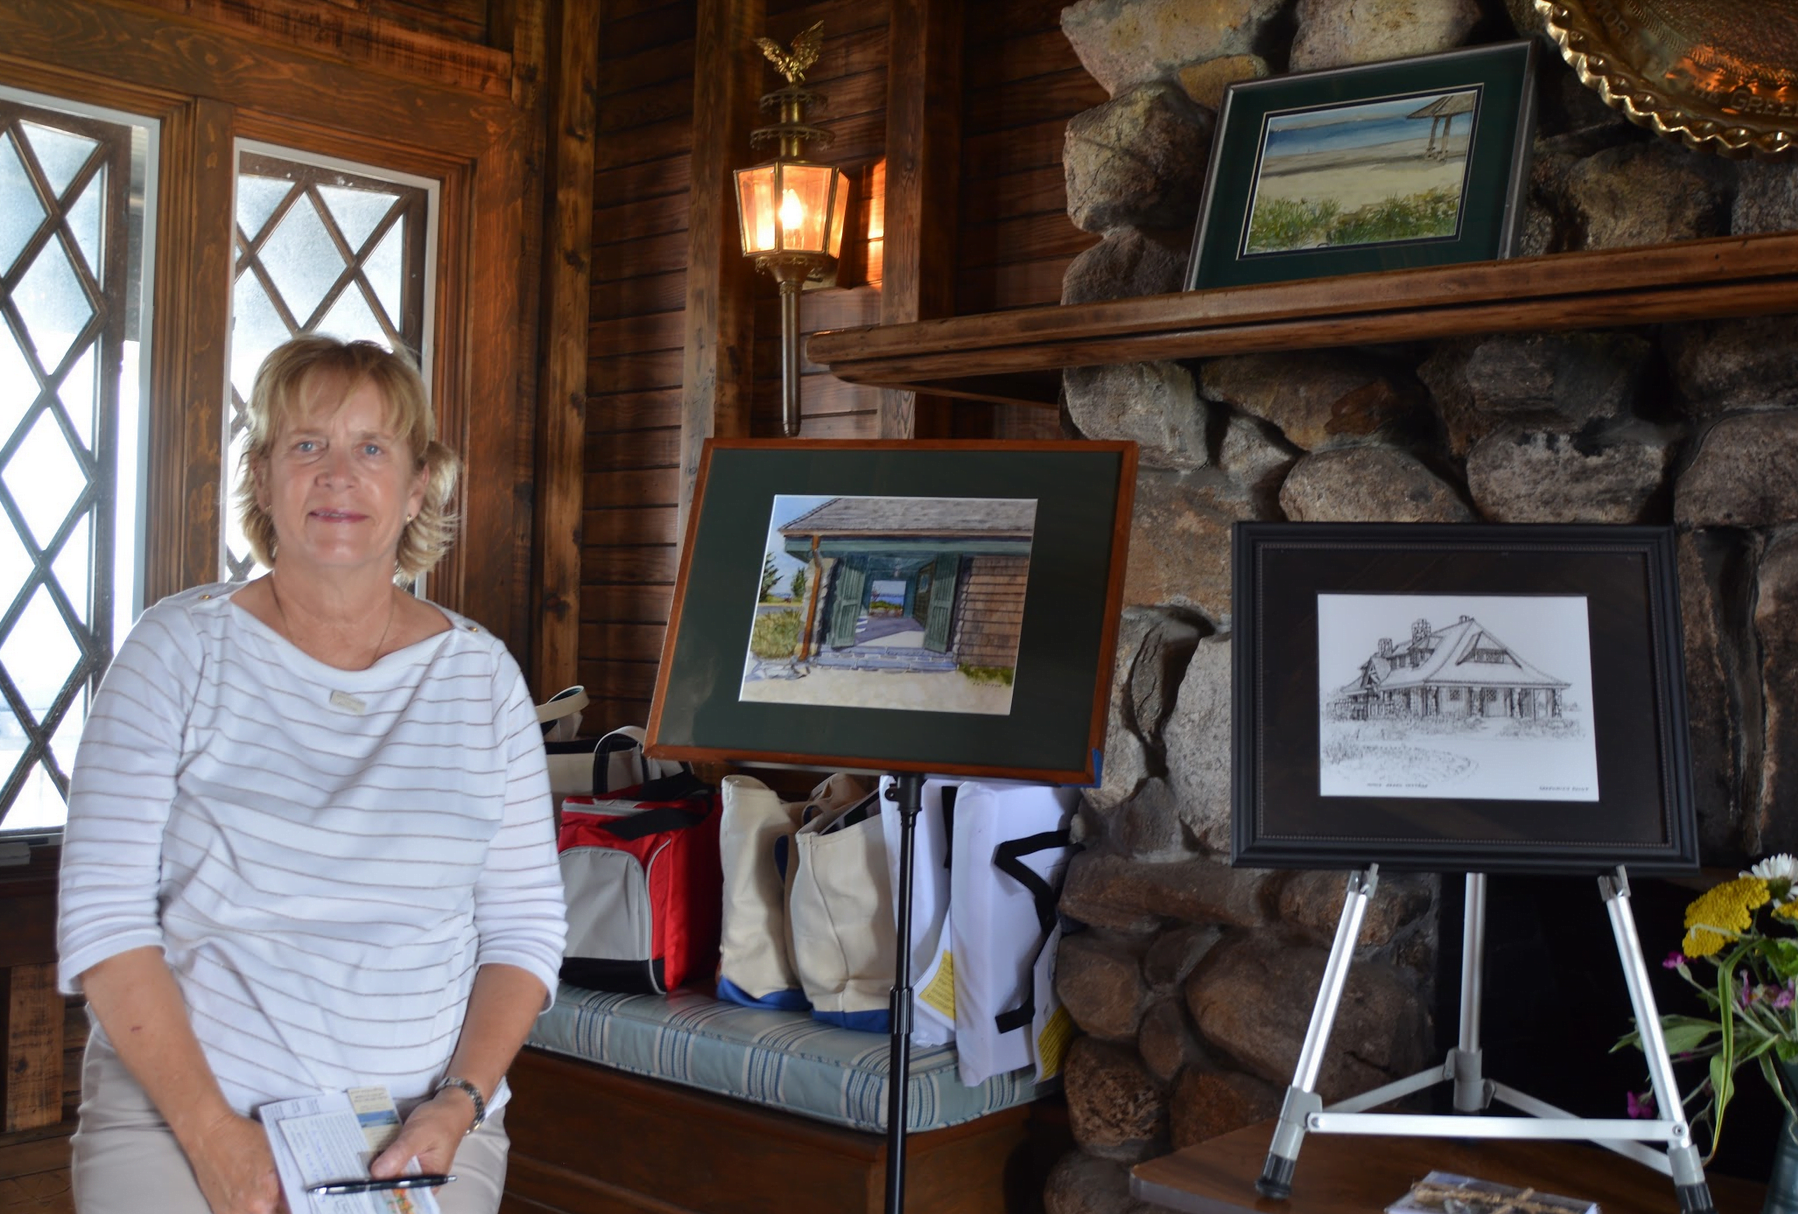 The 11th annual Experience the Sound event featured an art show inside Innis Arden Cottage. June 25, 2017 Photo: Matthew Bracchitta